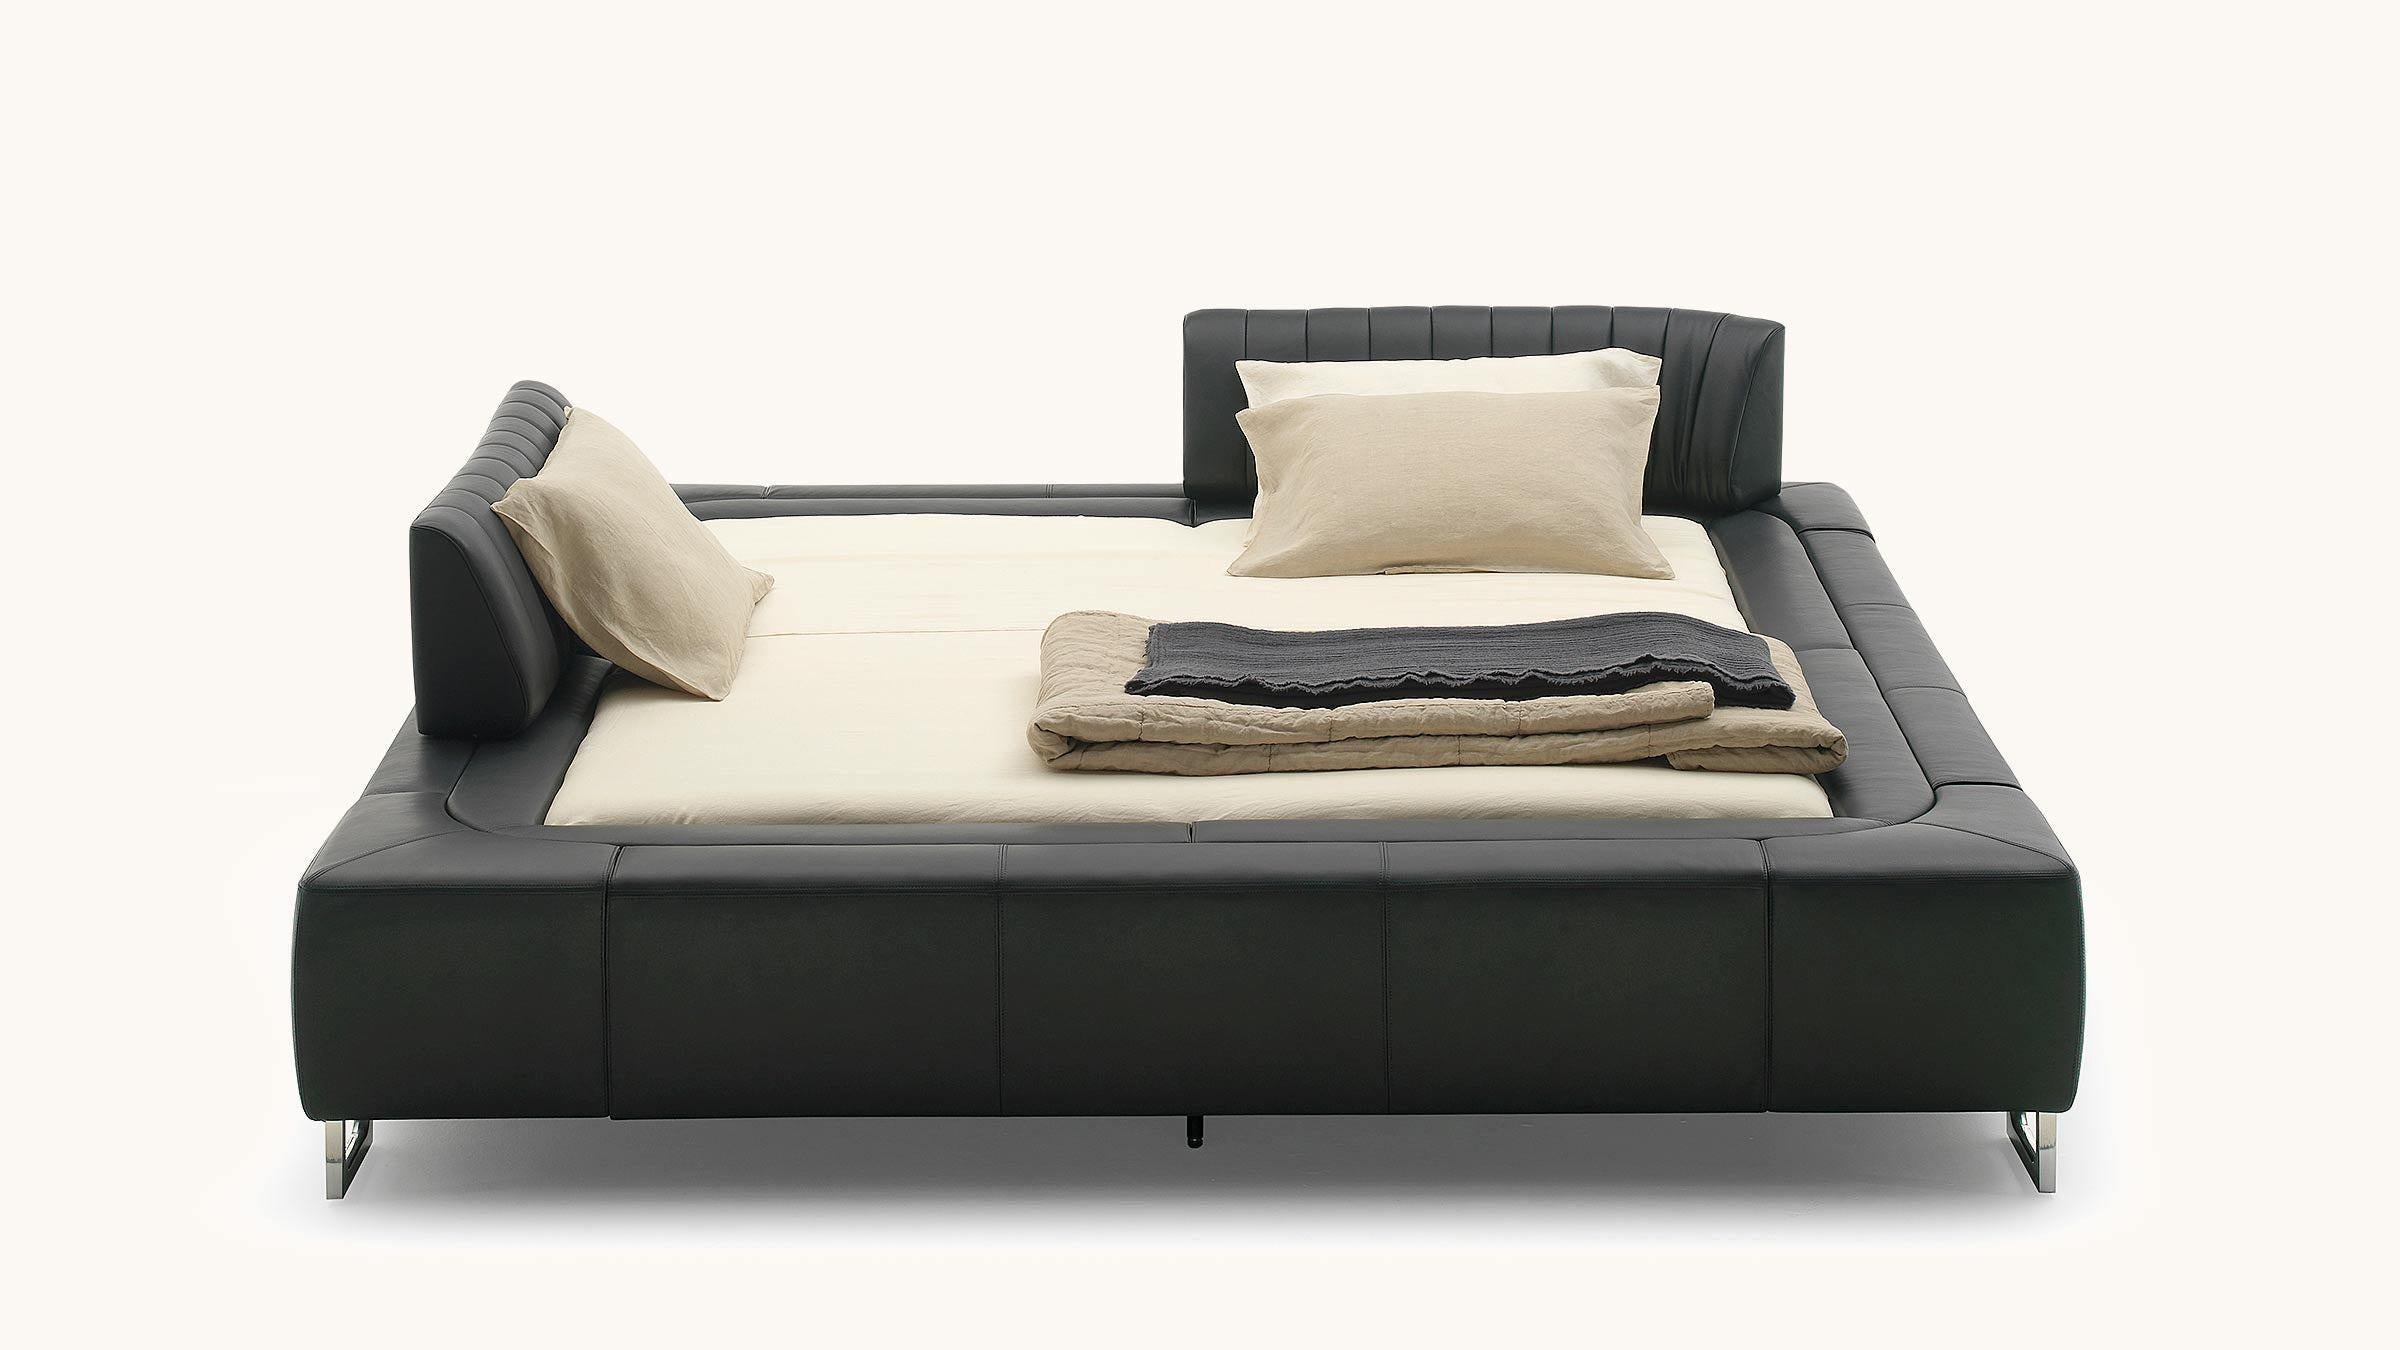 Desede DS-1165 King Size Bed in Leather by Hugo De Ruiter In New Condition For Sale In Brooklyn, NY